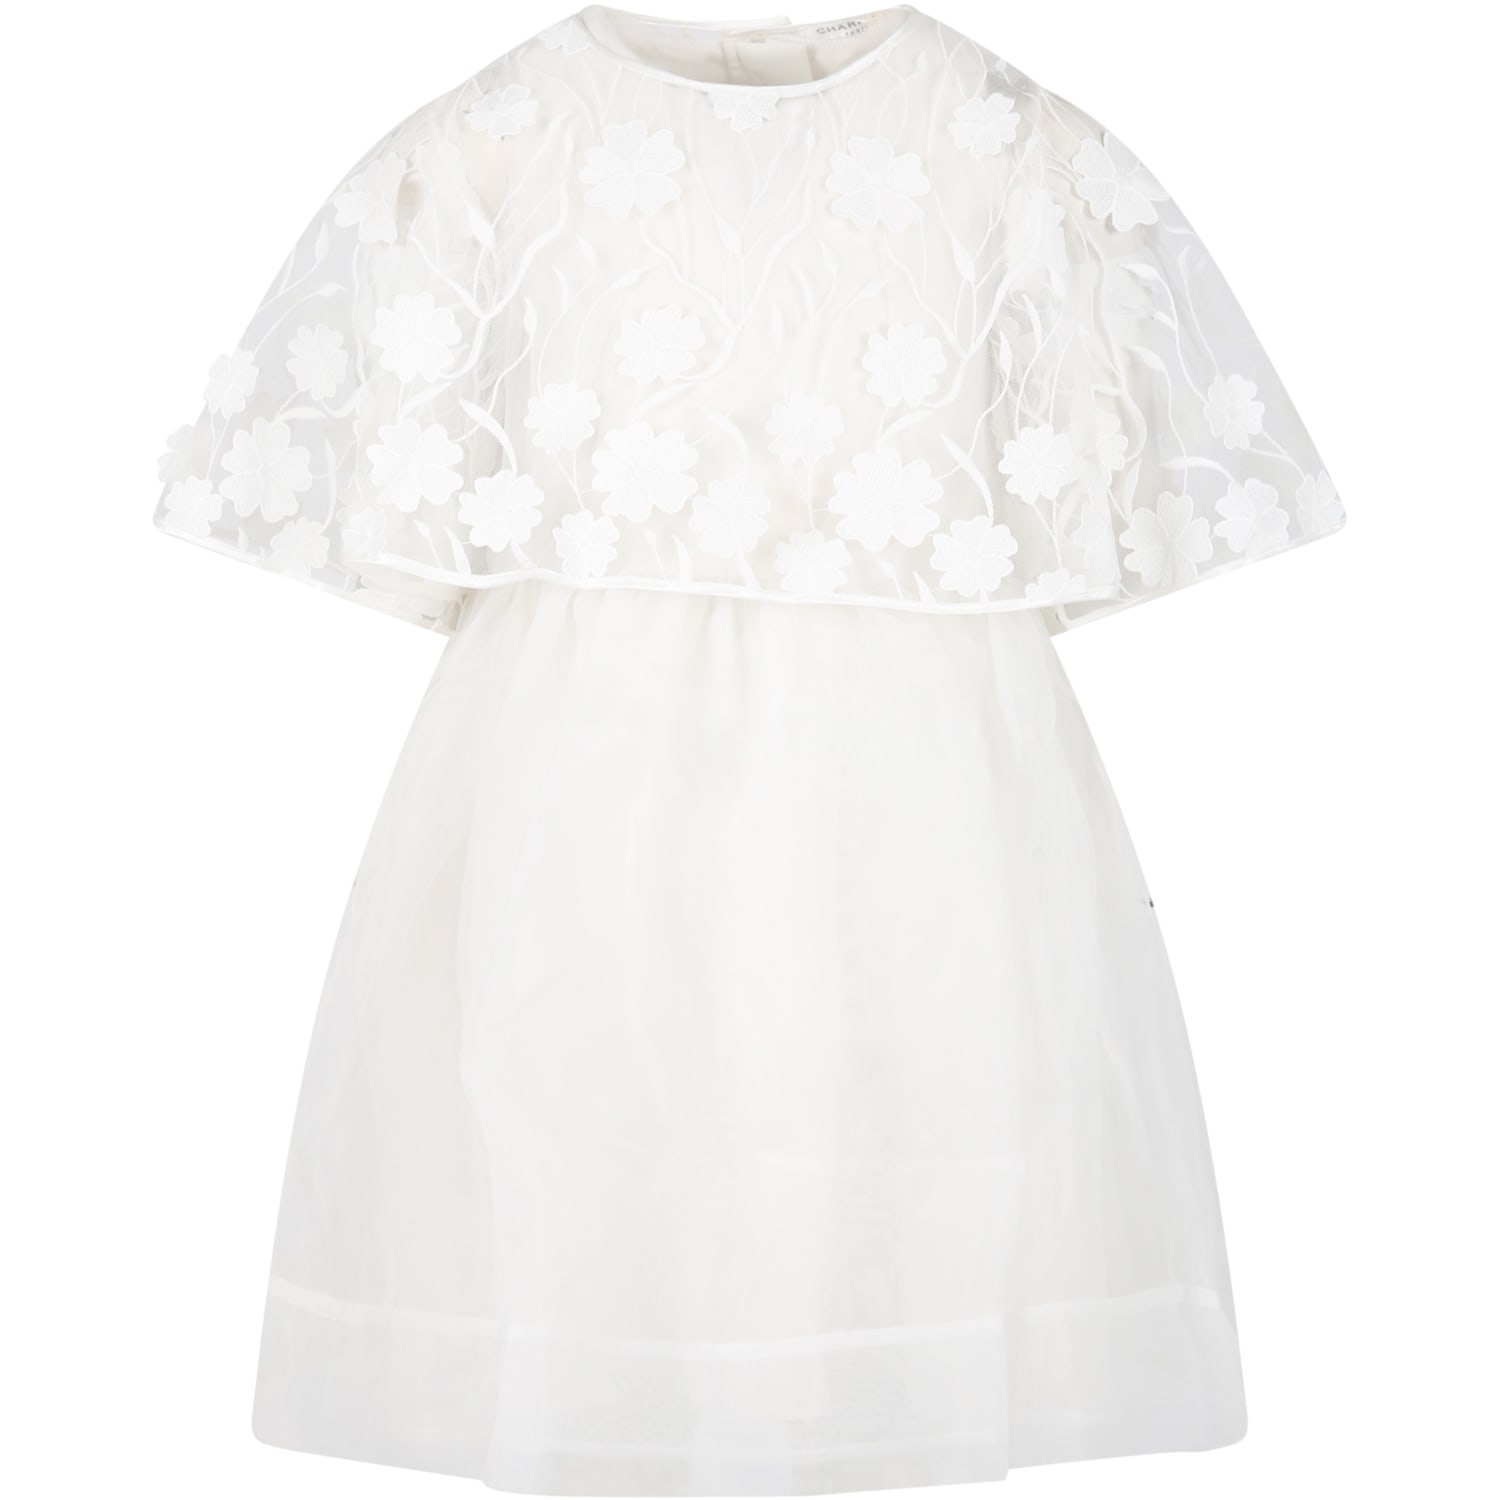 Charabia Kids' White Dress For Girl With Lace In Ivory